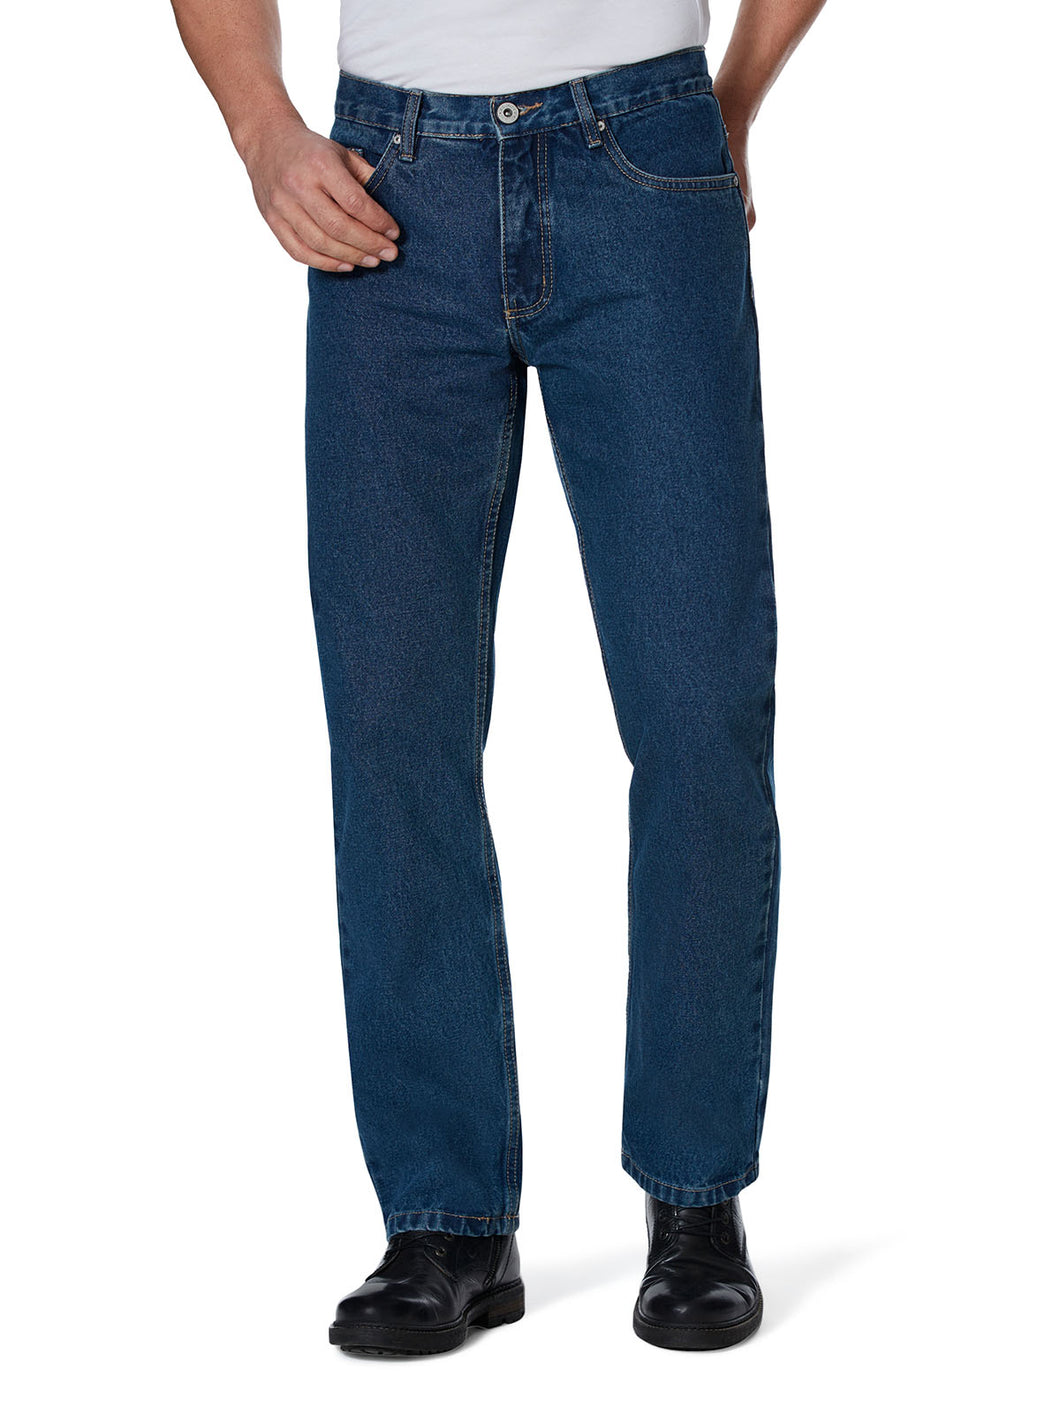 ROUNDER MADOX - 100% Baumwolle - JEANS HOSE - blue stone